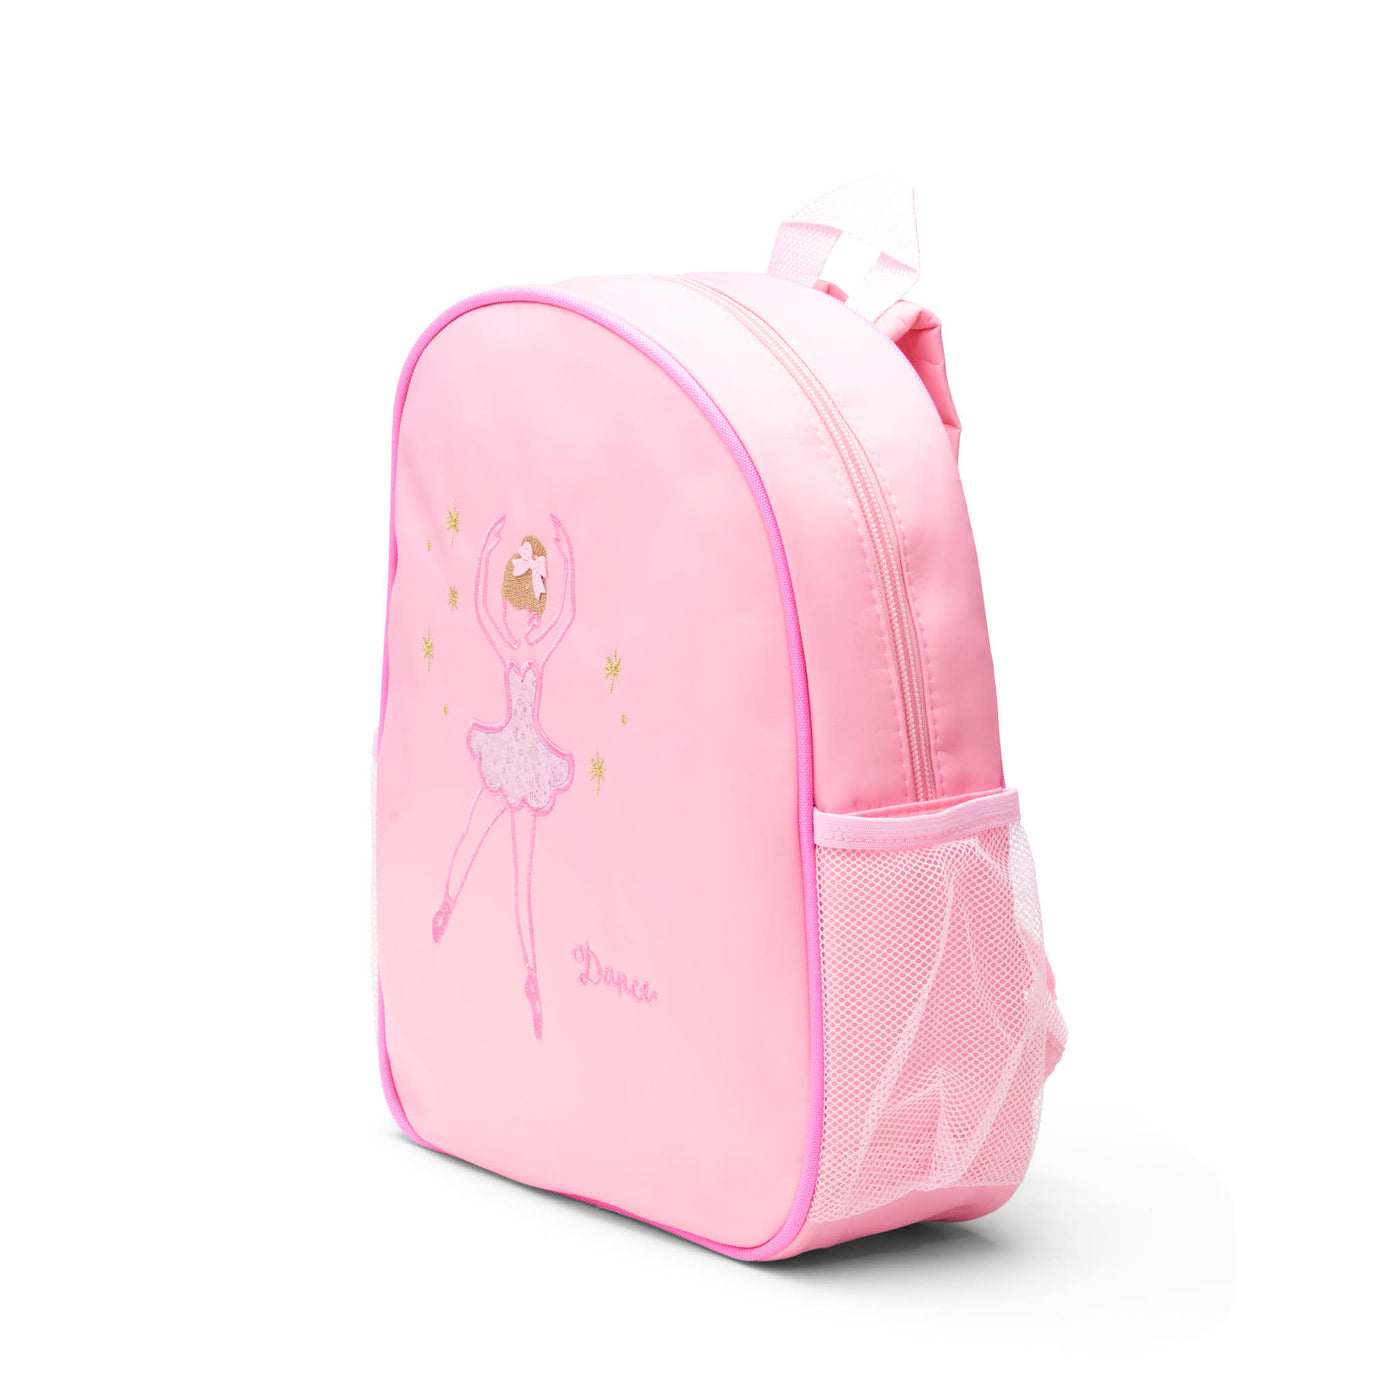 Girls Dance Backpack Toddler 3-8 Years Pink